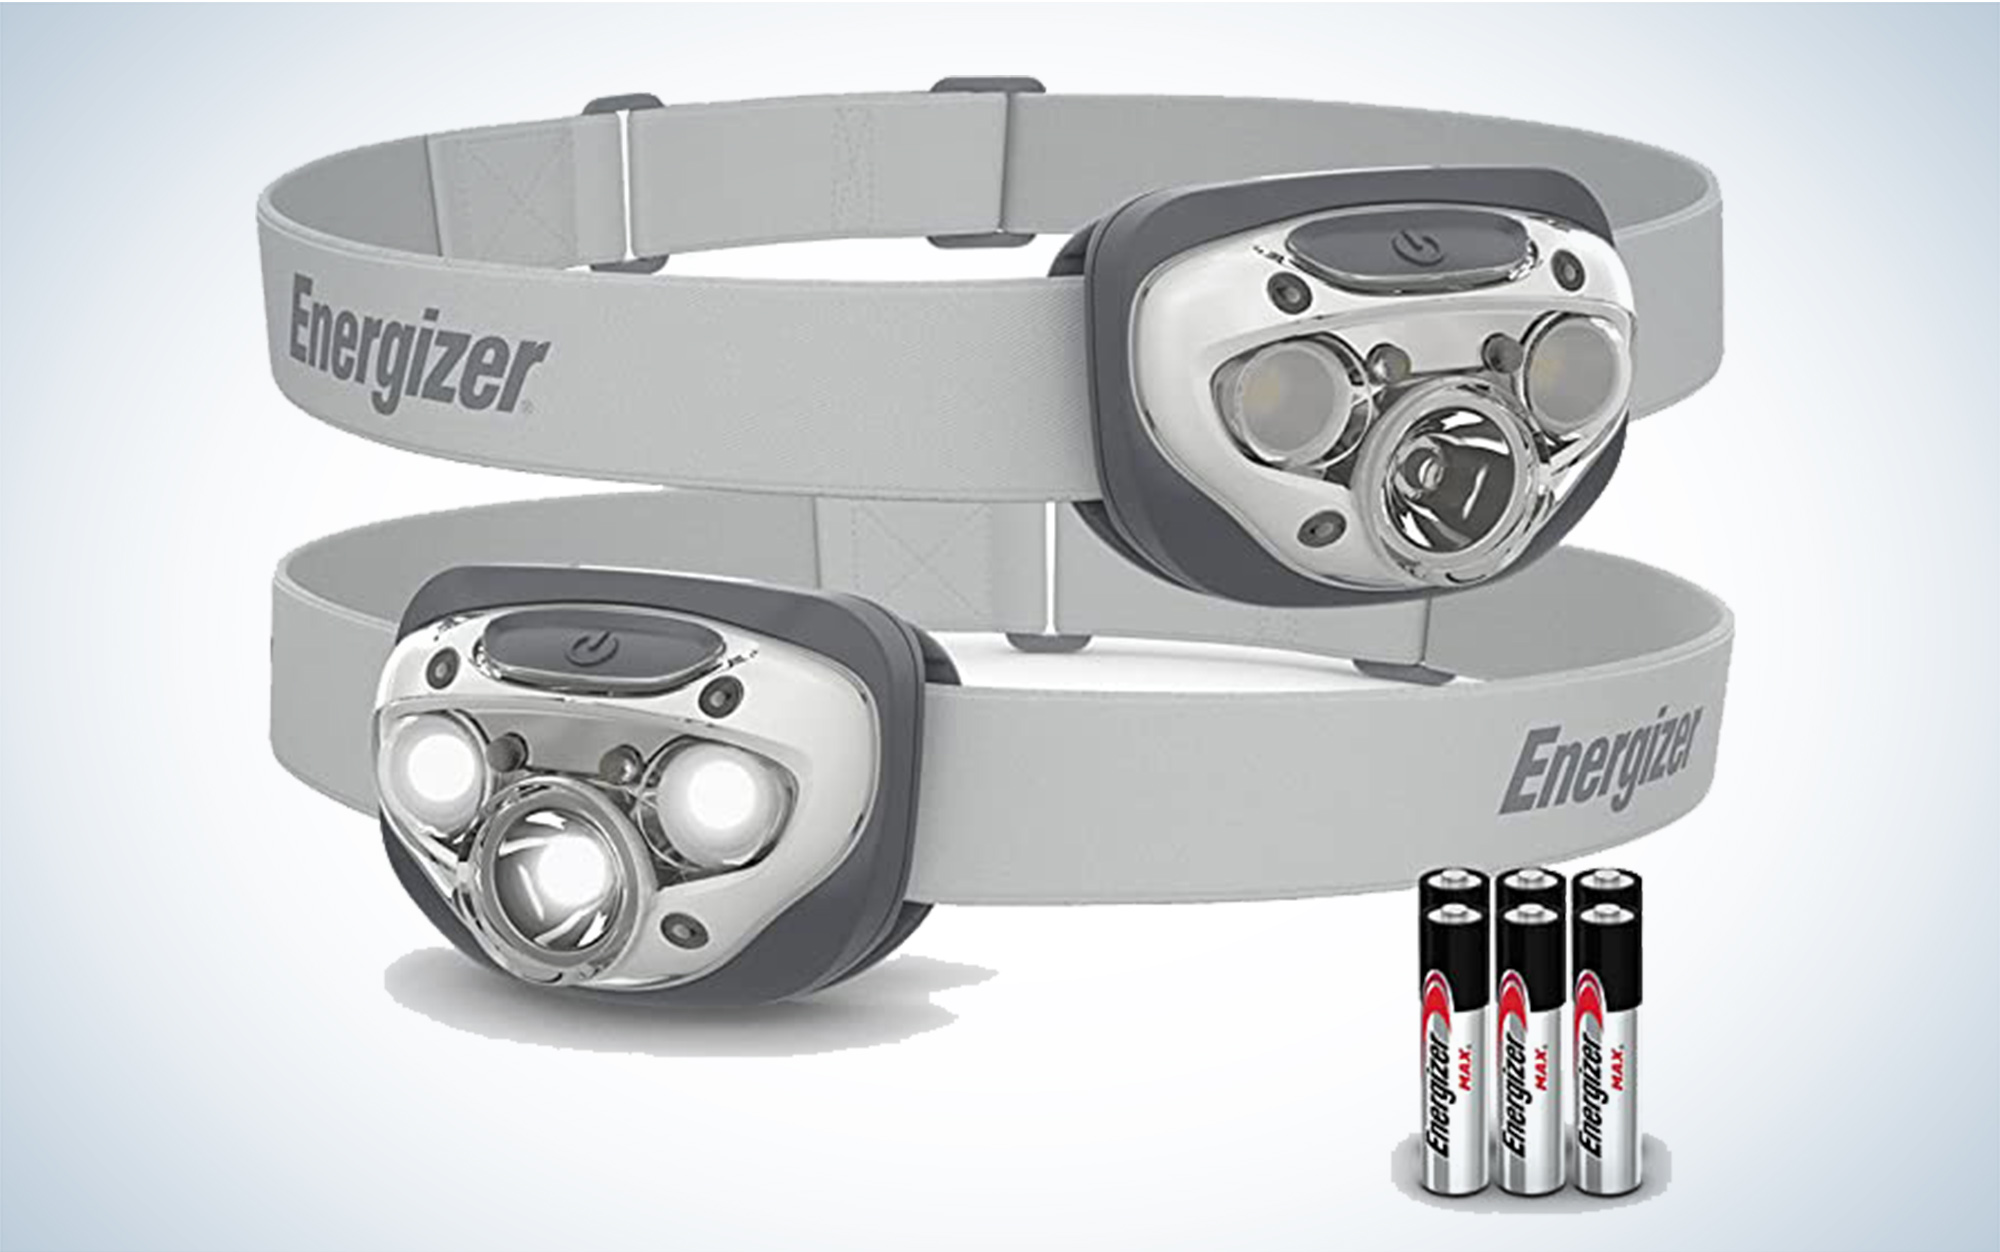 The Energizer LED headlamps come with batteries.